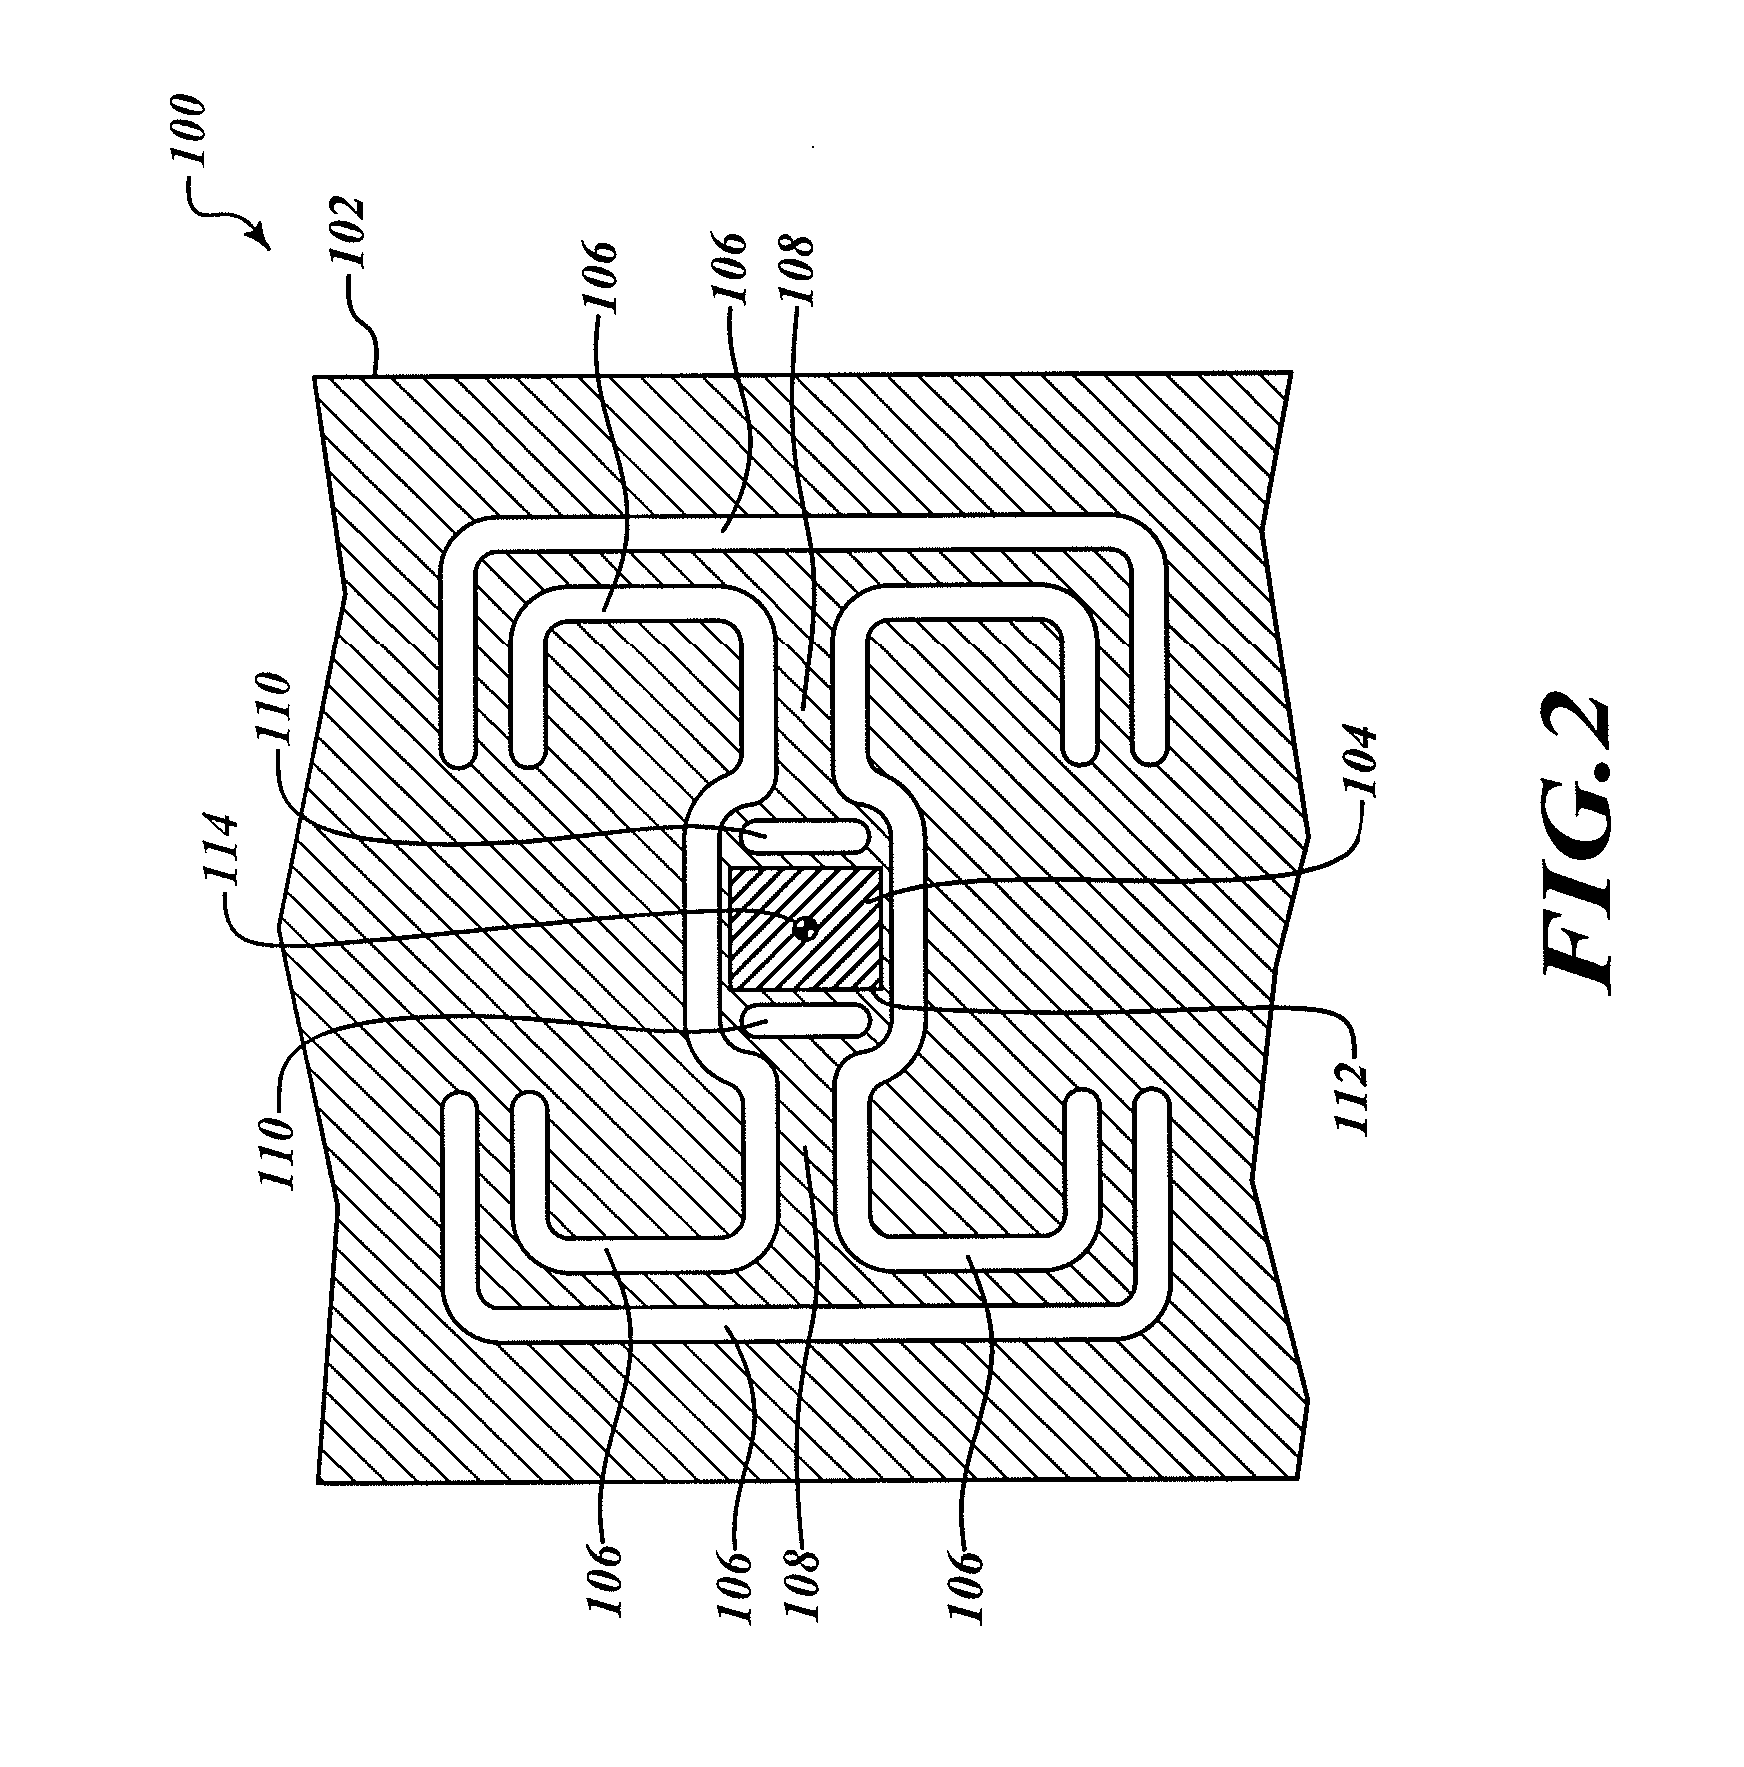 Mounting system for torsional suspension of a MEMS device